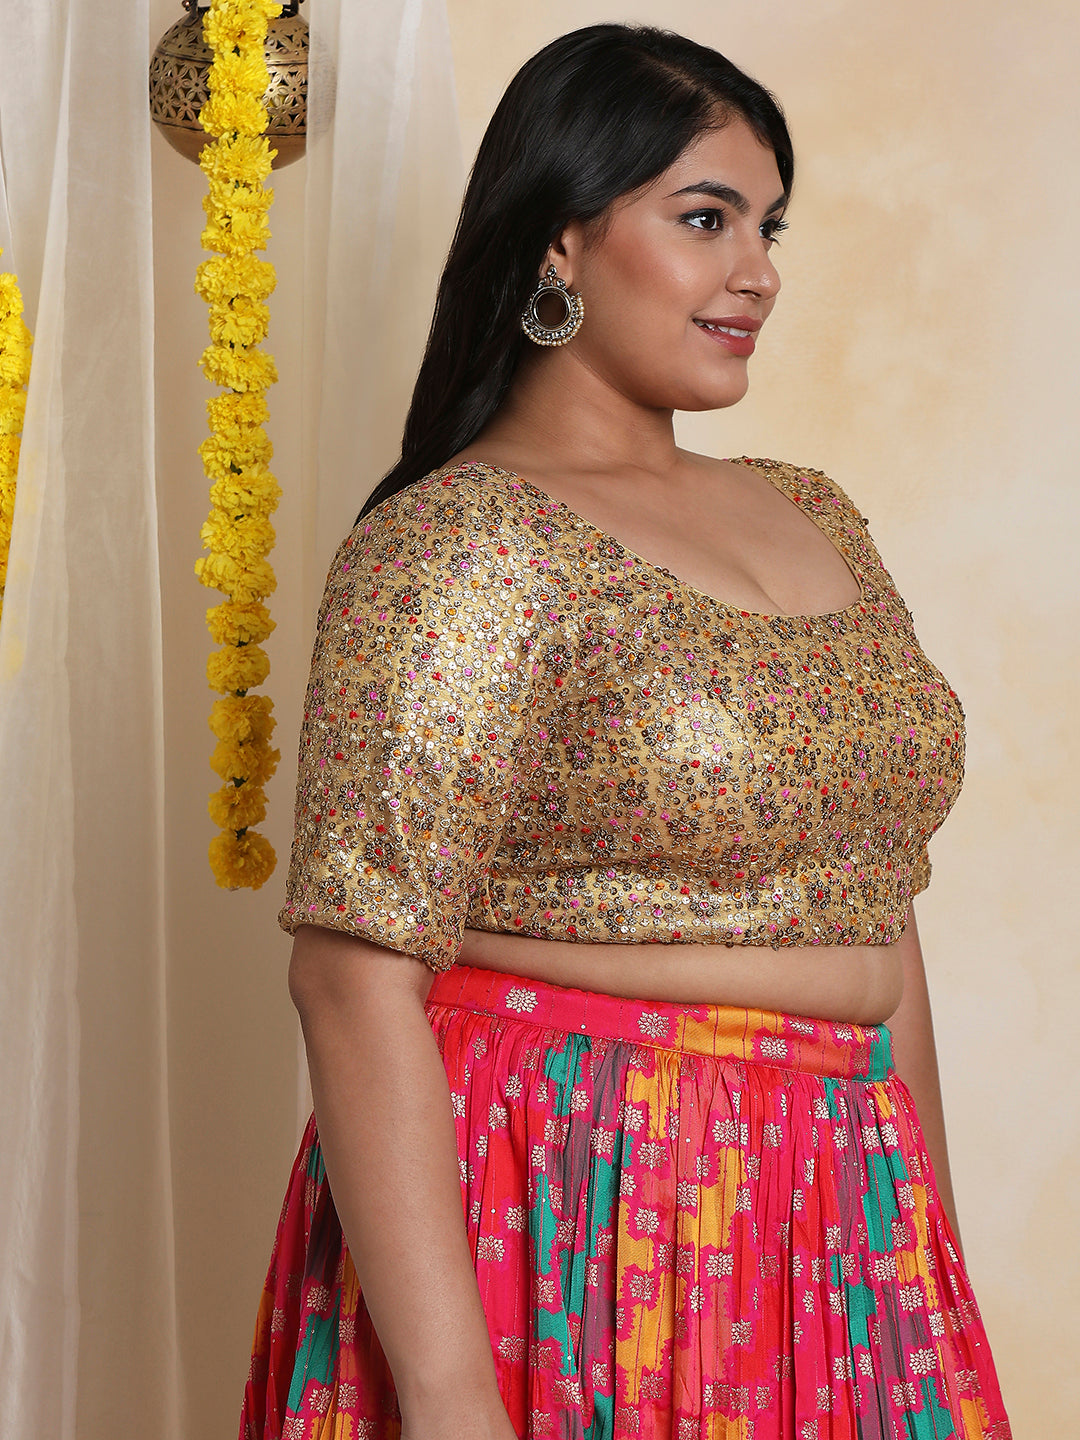 Blouse designs for plus size women: - Plus size women try this blouse design,  you will look beautiful - Kalam Times